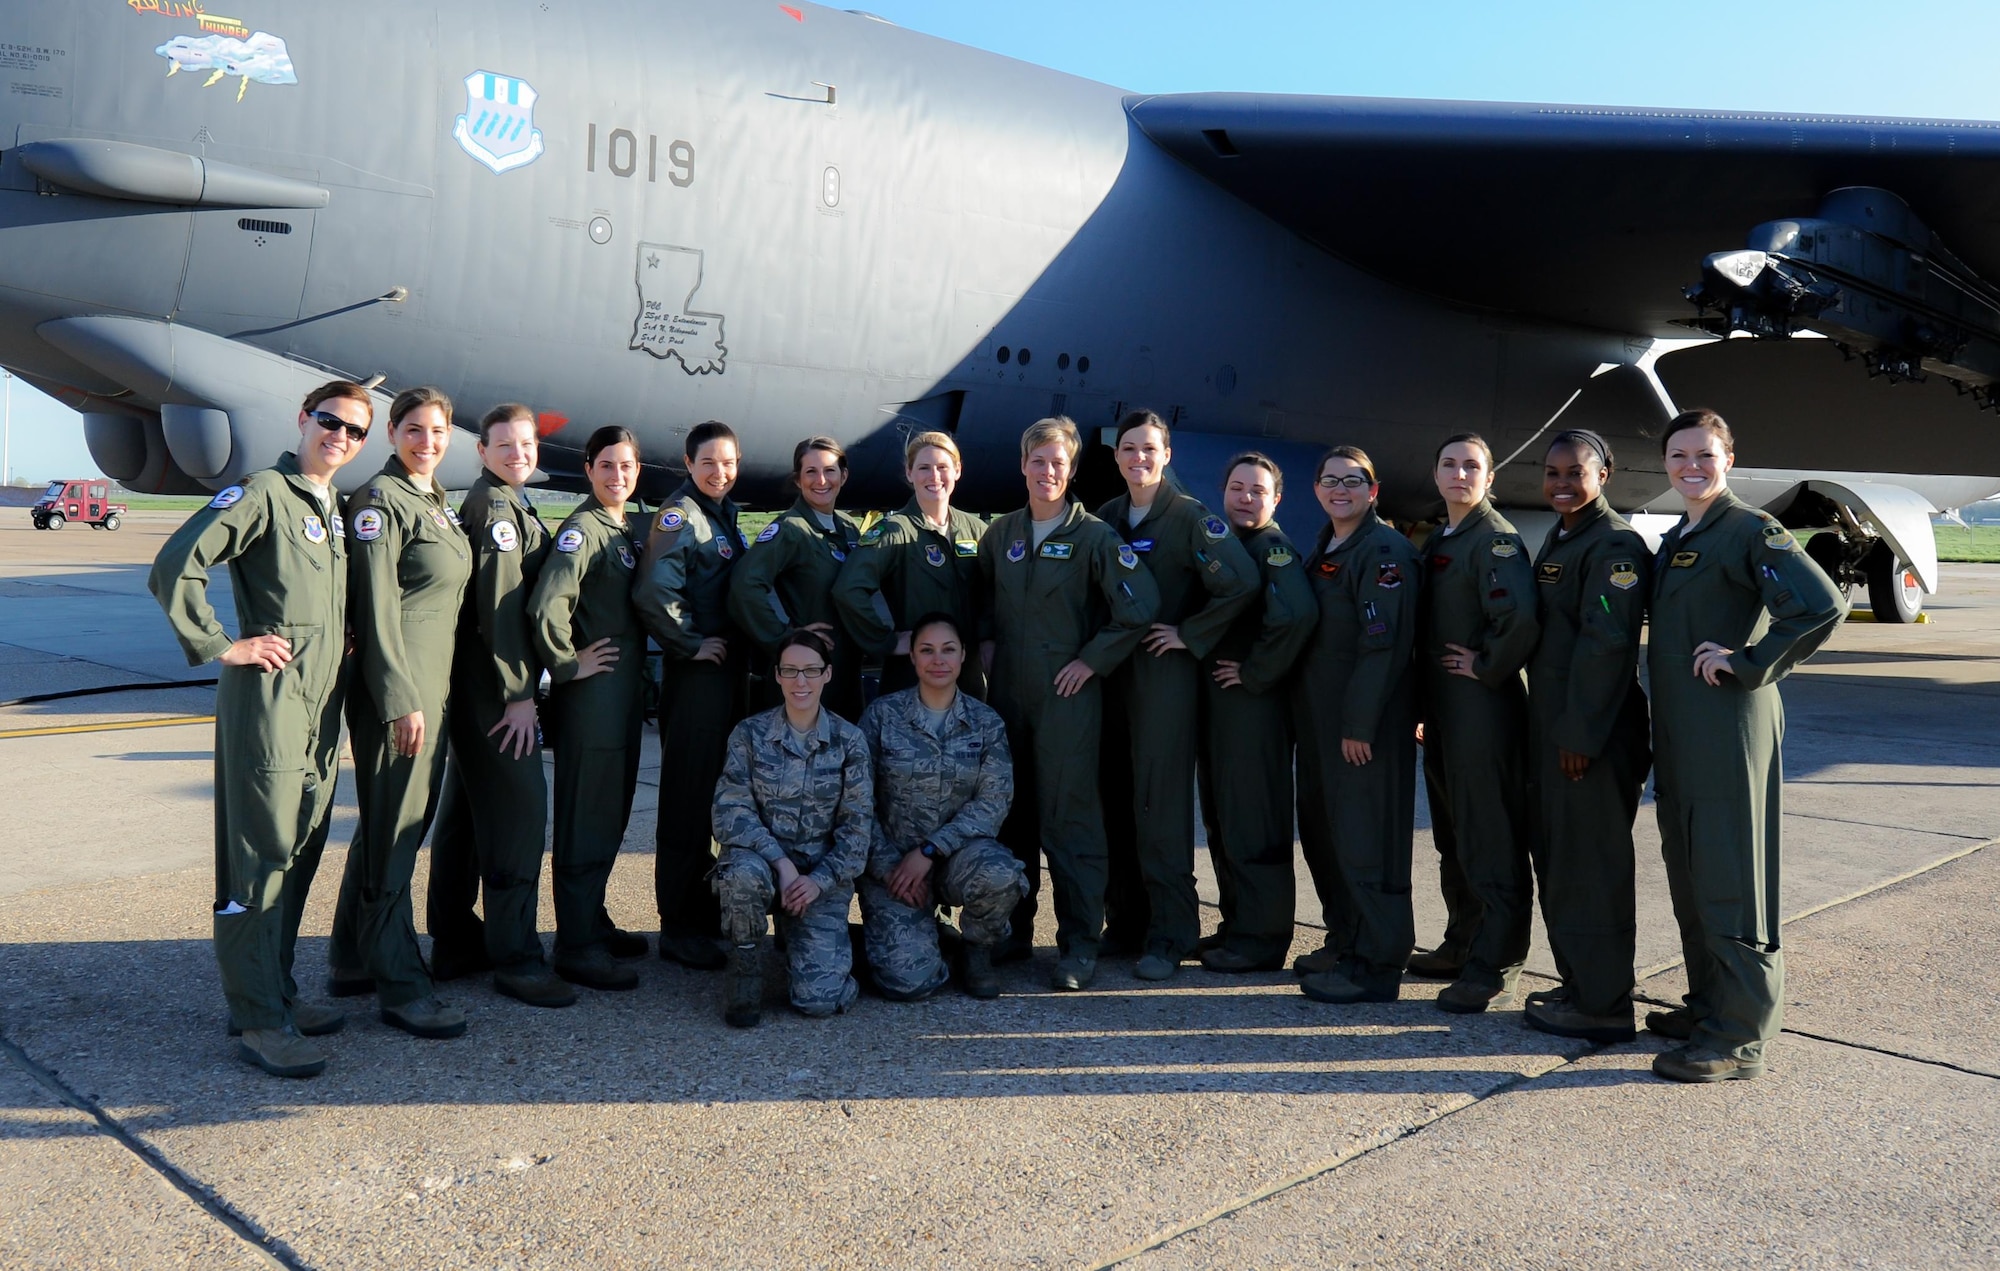 Fourteen aircrew members to include Col. Kristin Goodwin, 2nd Bomb Wing commander, and crew chiefs pose for a photo on the flightline at Barksdale Air Force Base, La., March 22, 2016. To celebrate women’s history month, two all-female aircrews were assembled to make U.S. Air Force history. (U.S. Air Force photo/2nd Lt. Jessica Adams)